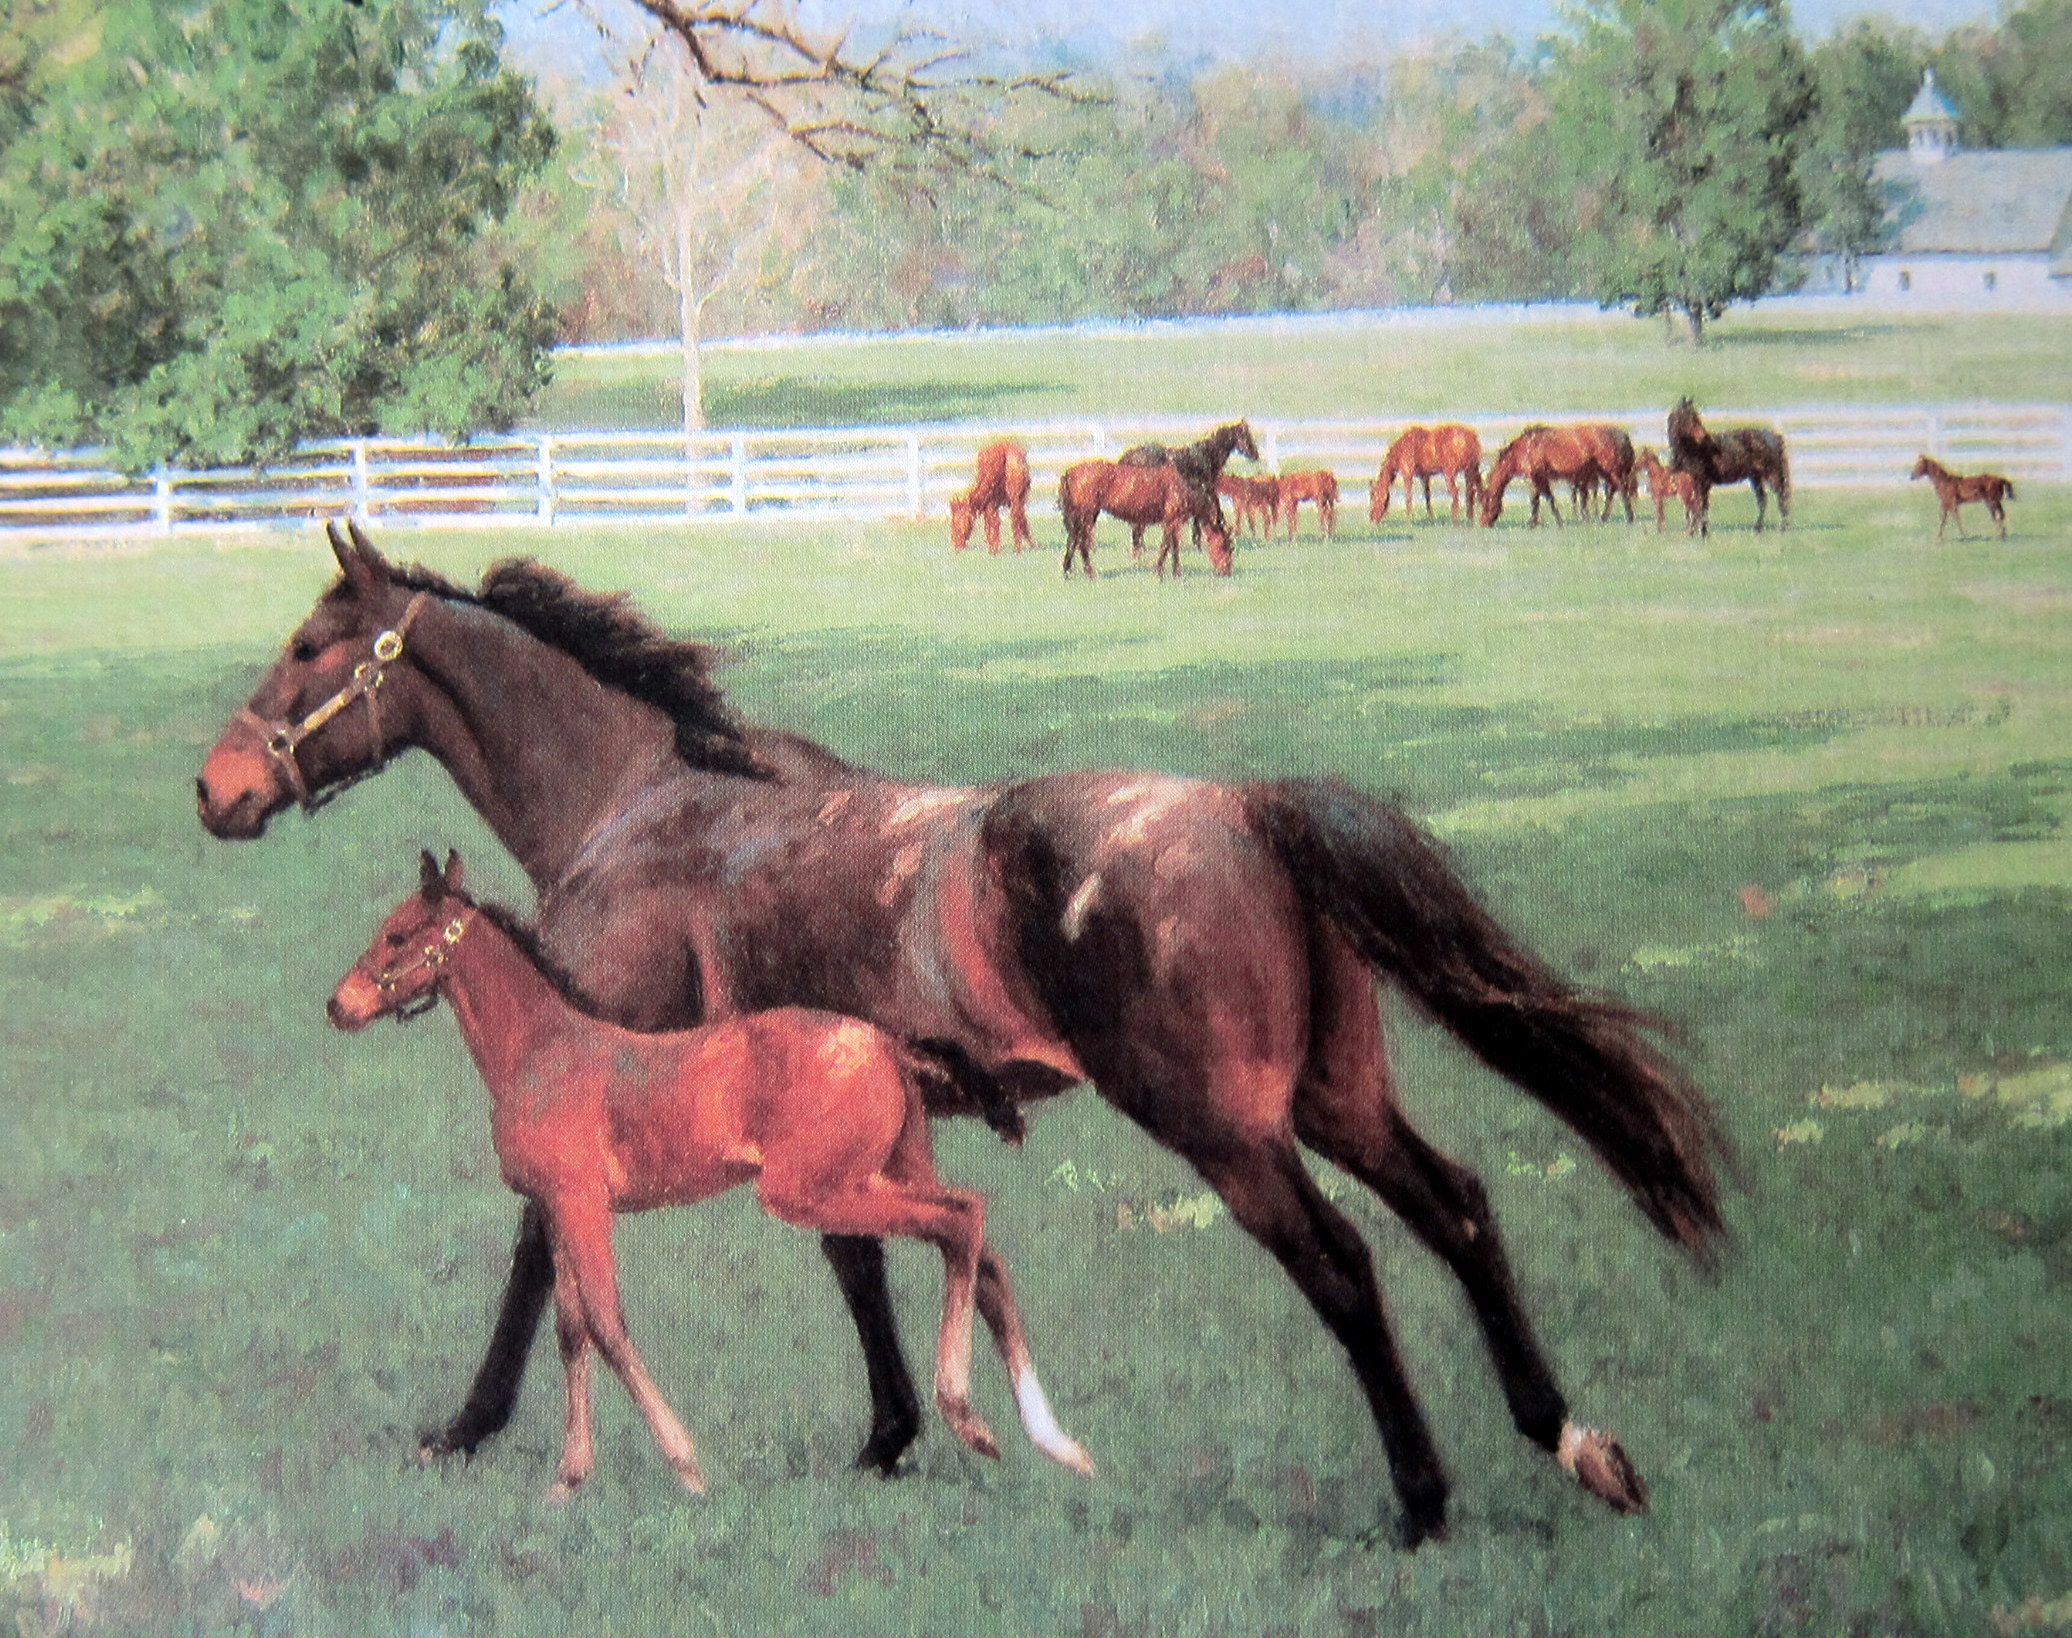 A beautiful soft painting of a large and small horse trotting together.